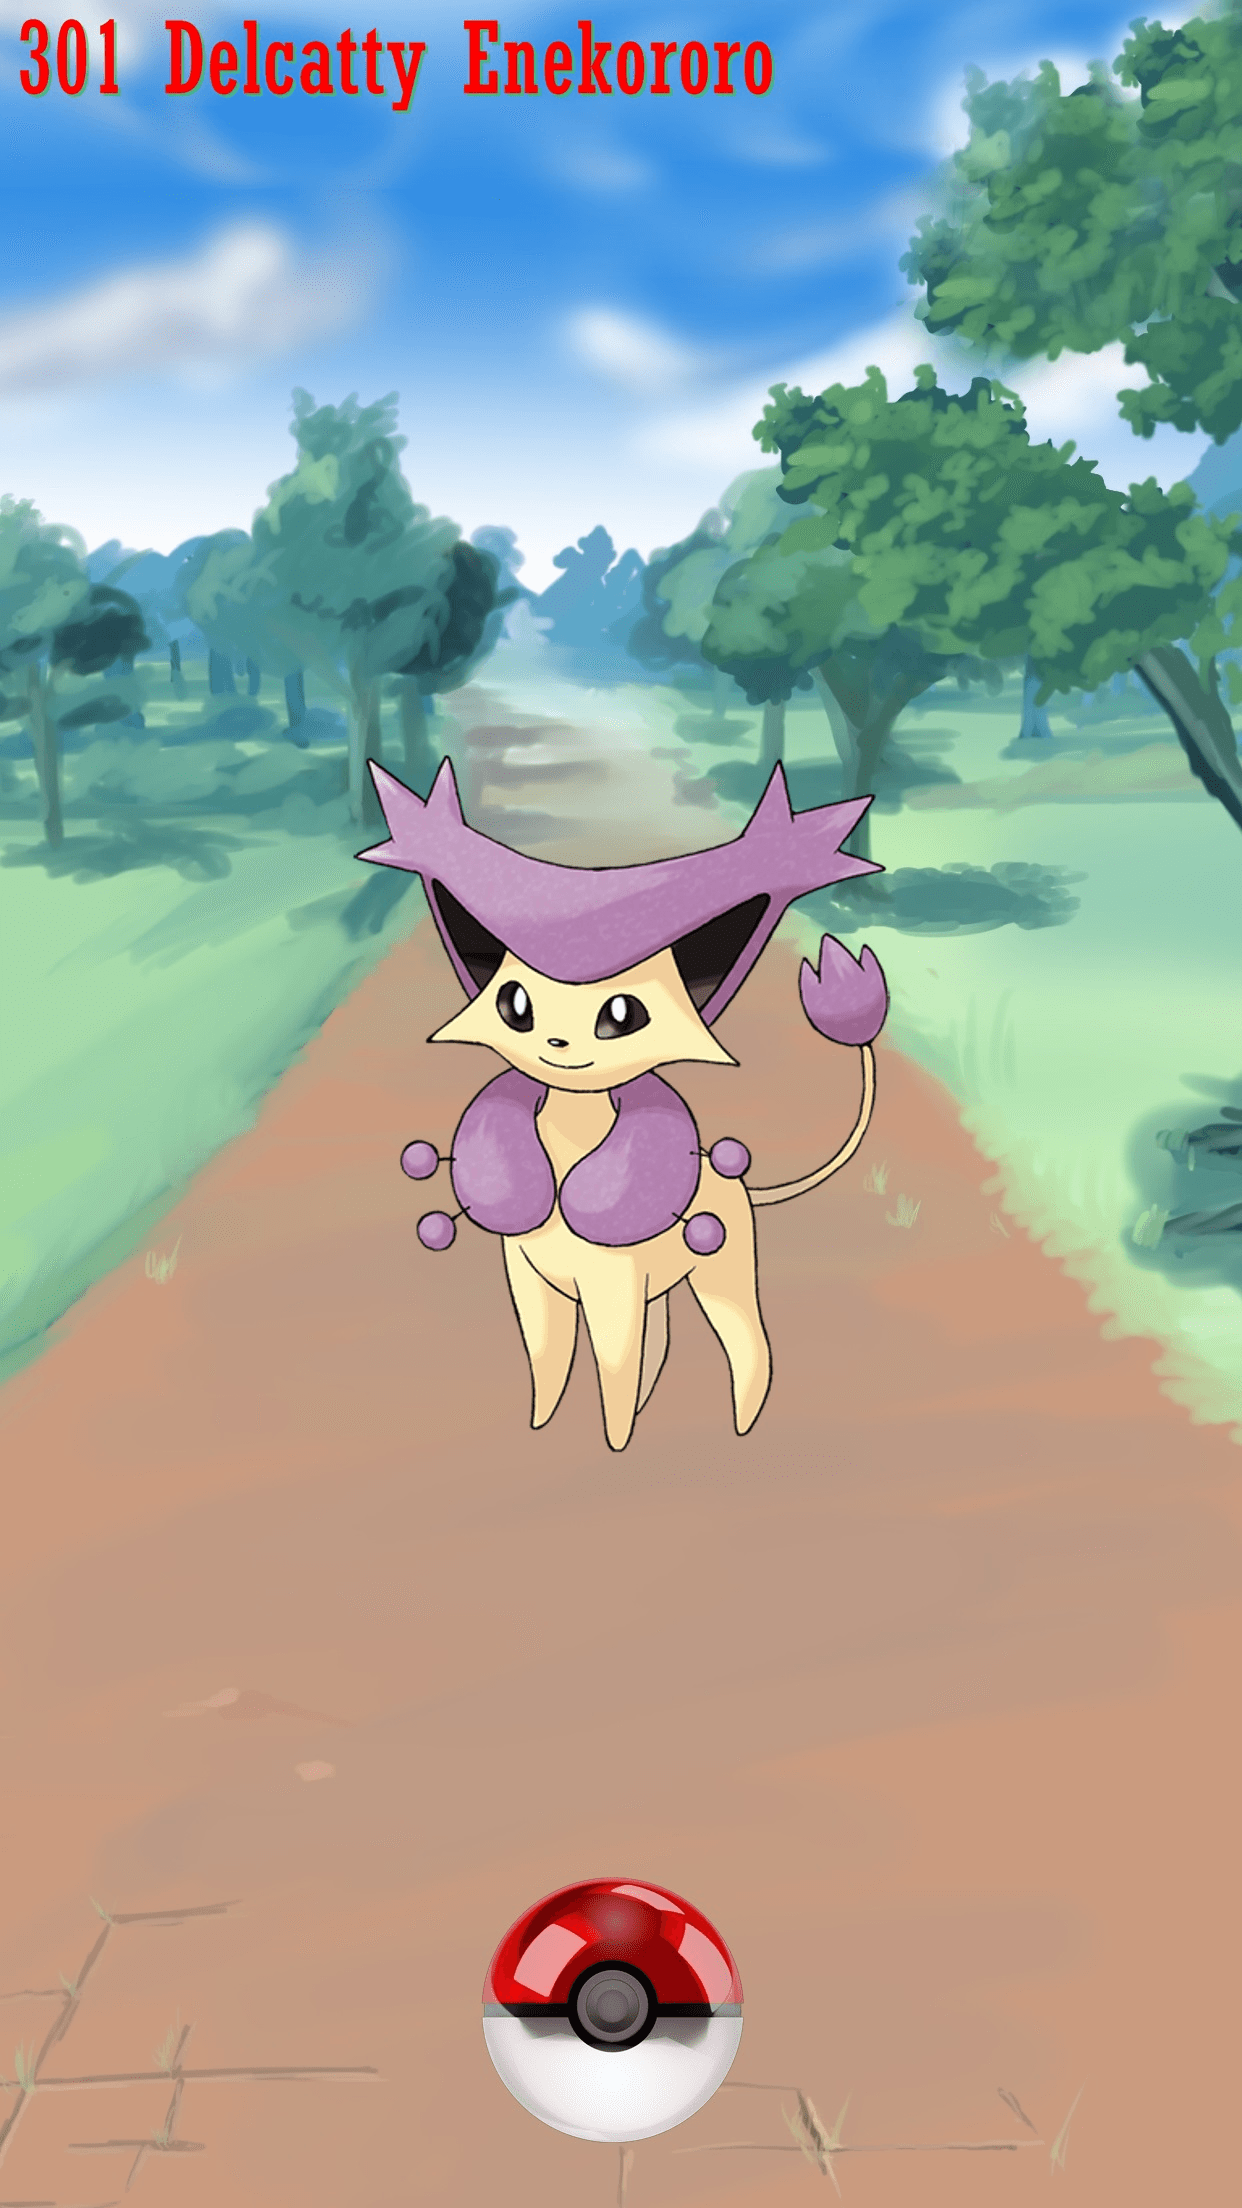 Delcatty Hd Wallpapers